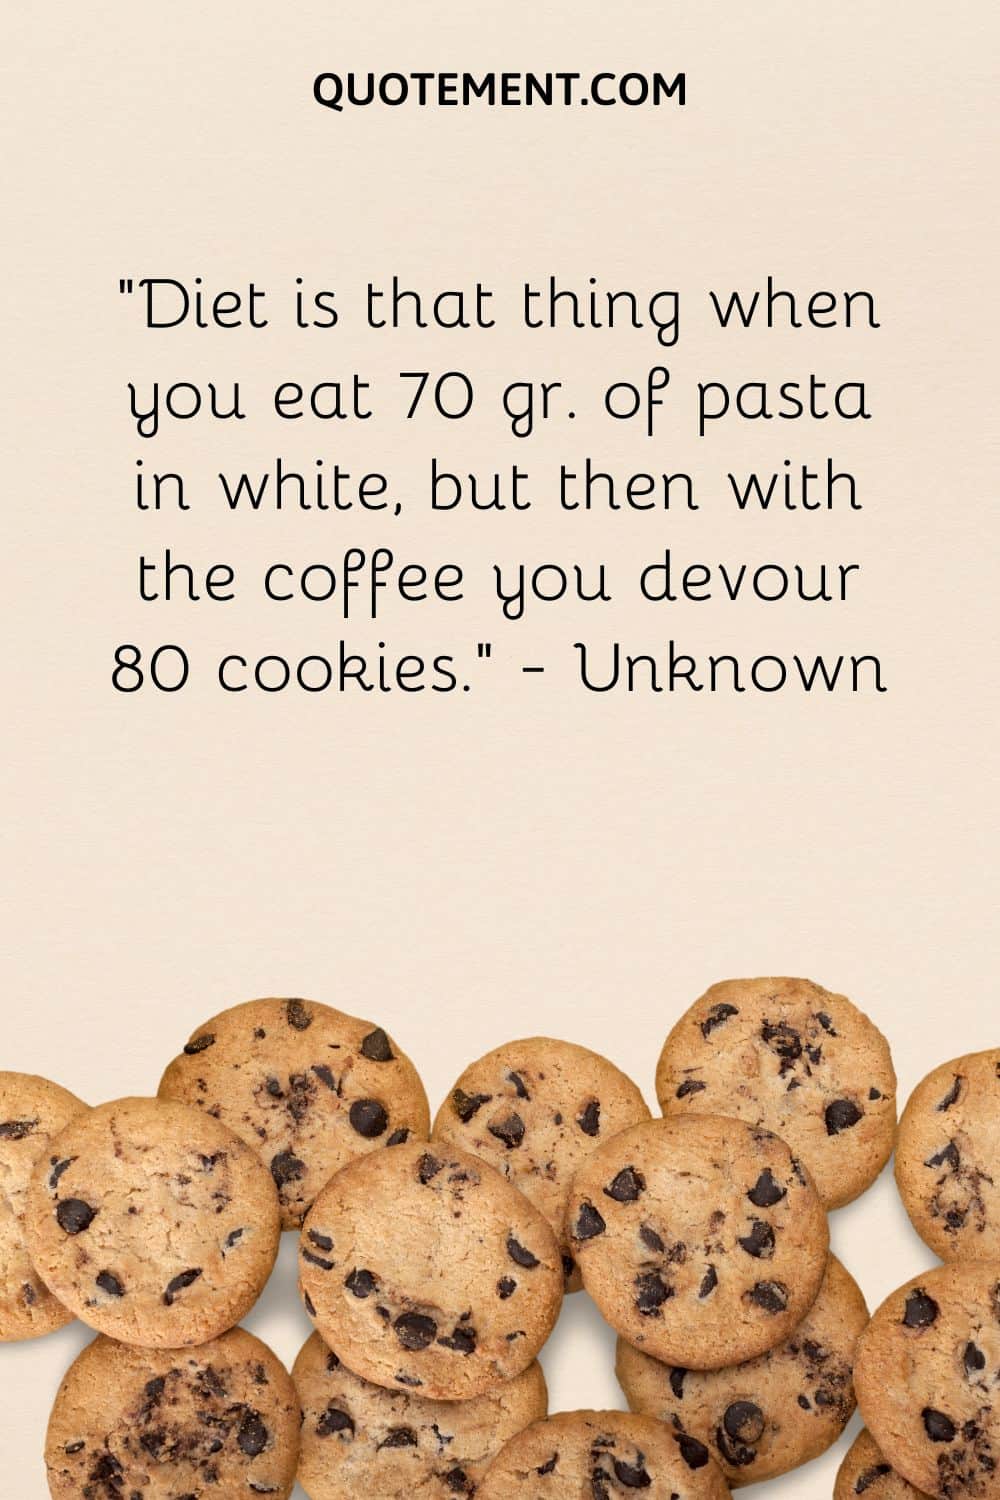 Diet is that thing when you eat 70 gr. of pasta in white, but then with the coffee you devour 80 cookies